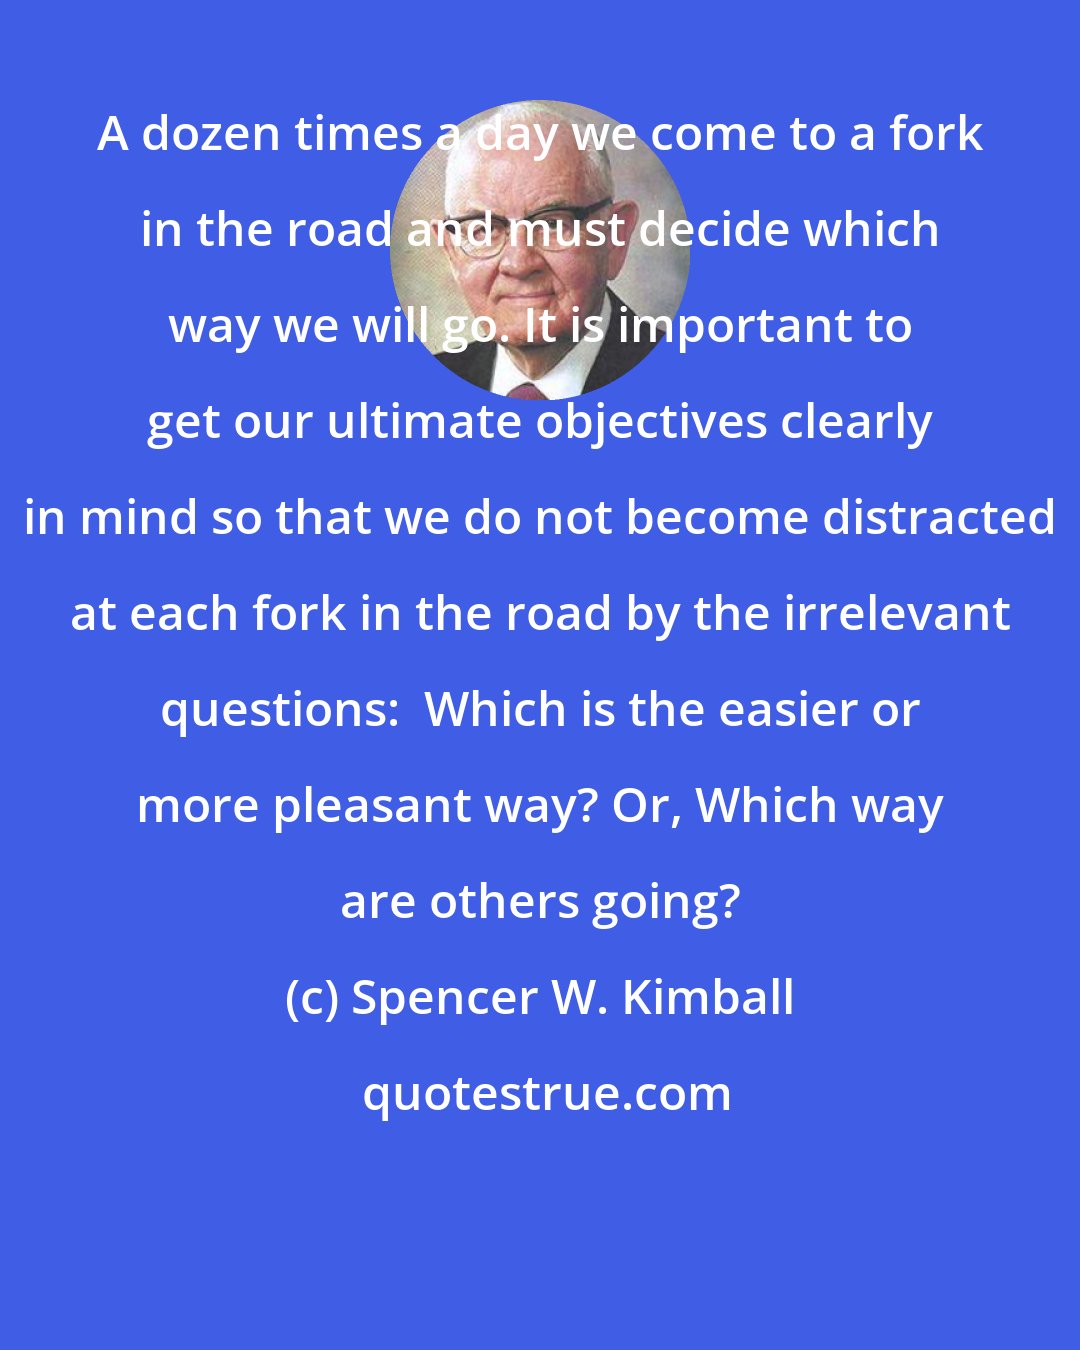 Spencer W. Kimball: A dozen times a day we come to a fork in the road and must decide which way we will go. It is important to get our ultimate objectives clearly in mind so that we do not become distracted at each fork in the road by the irrelevant questions:  Which is the easier or more pleasant way? Or, Which way are others going?